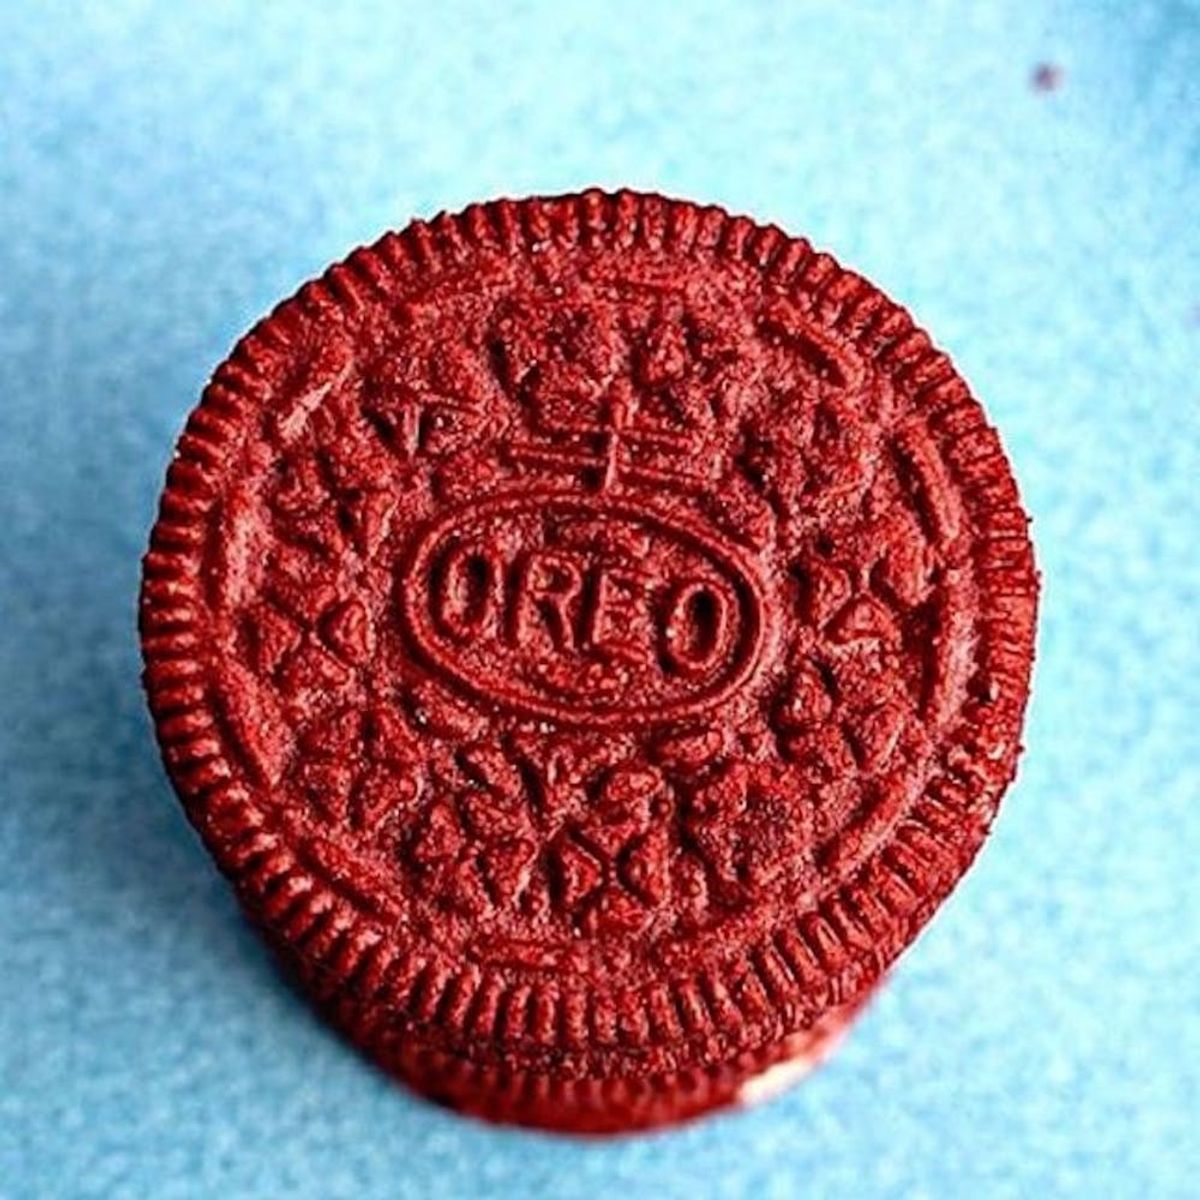 20 Crazy Oreo Flavors Ranked from Worst to Best